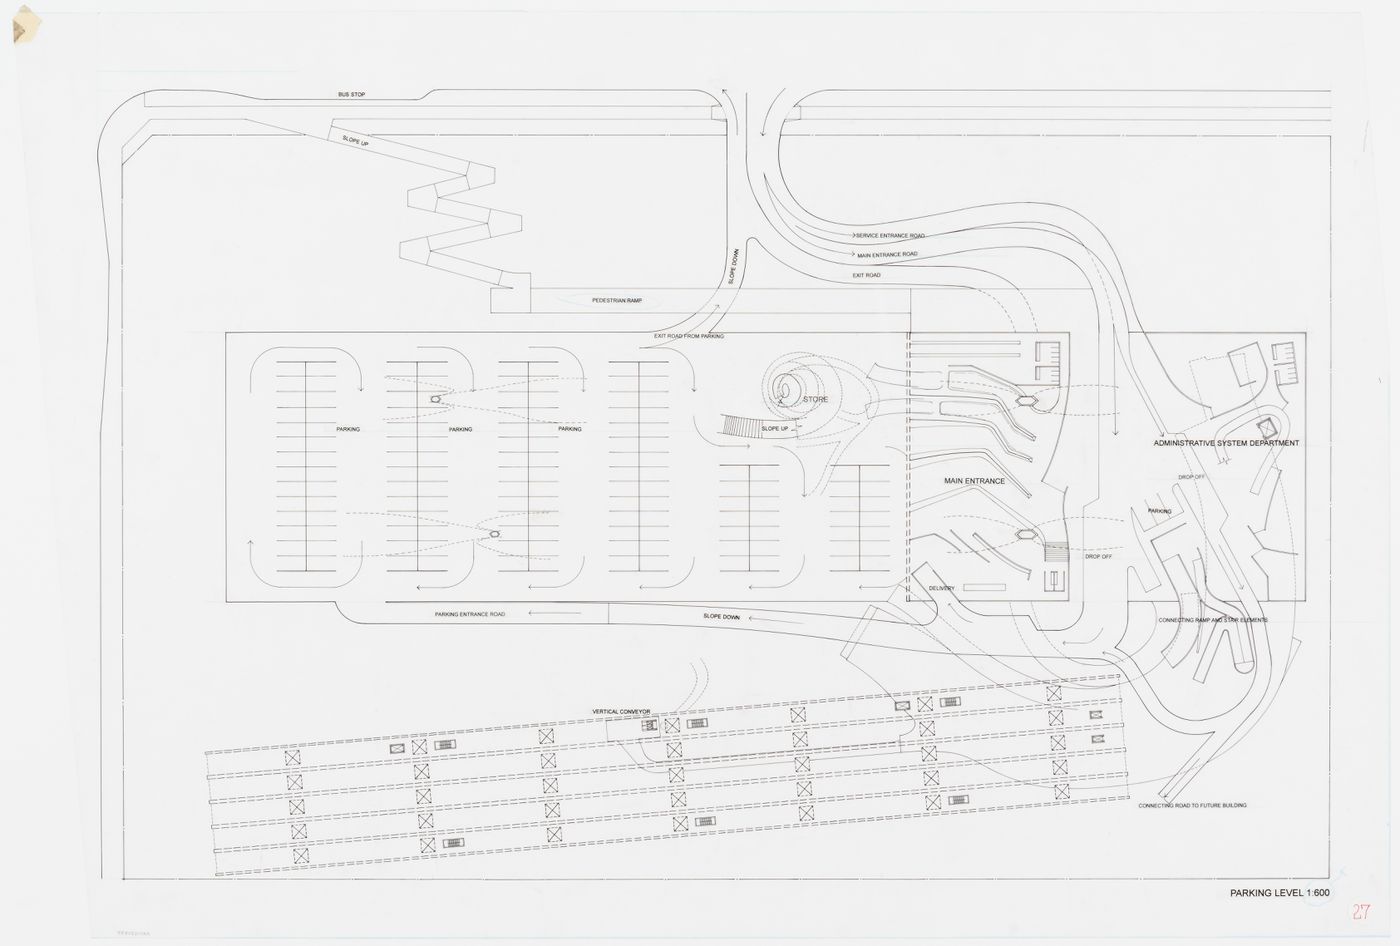 Parking level plan, scale 1:600, Kansai-Kan of the National Diet Library, Seika, Japan